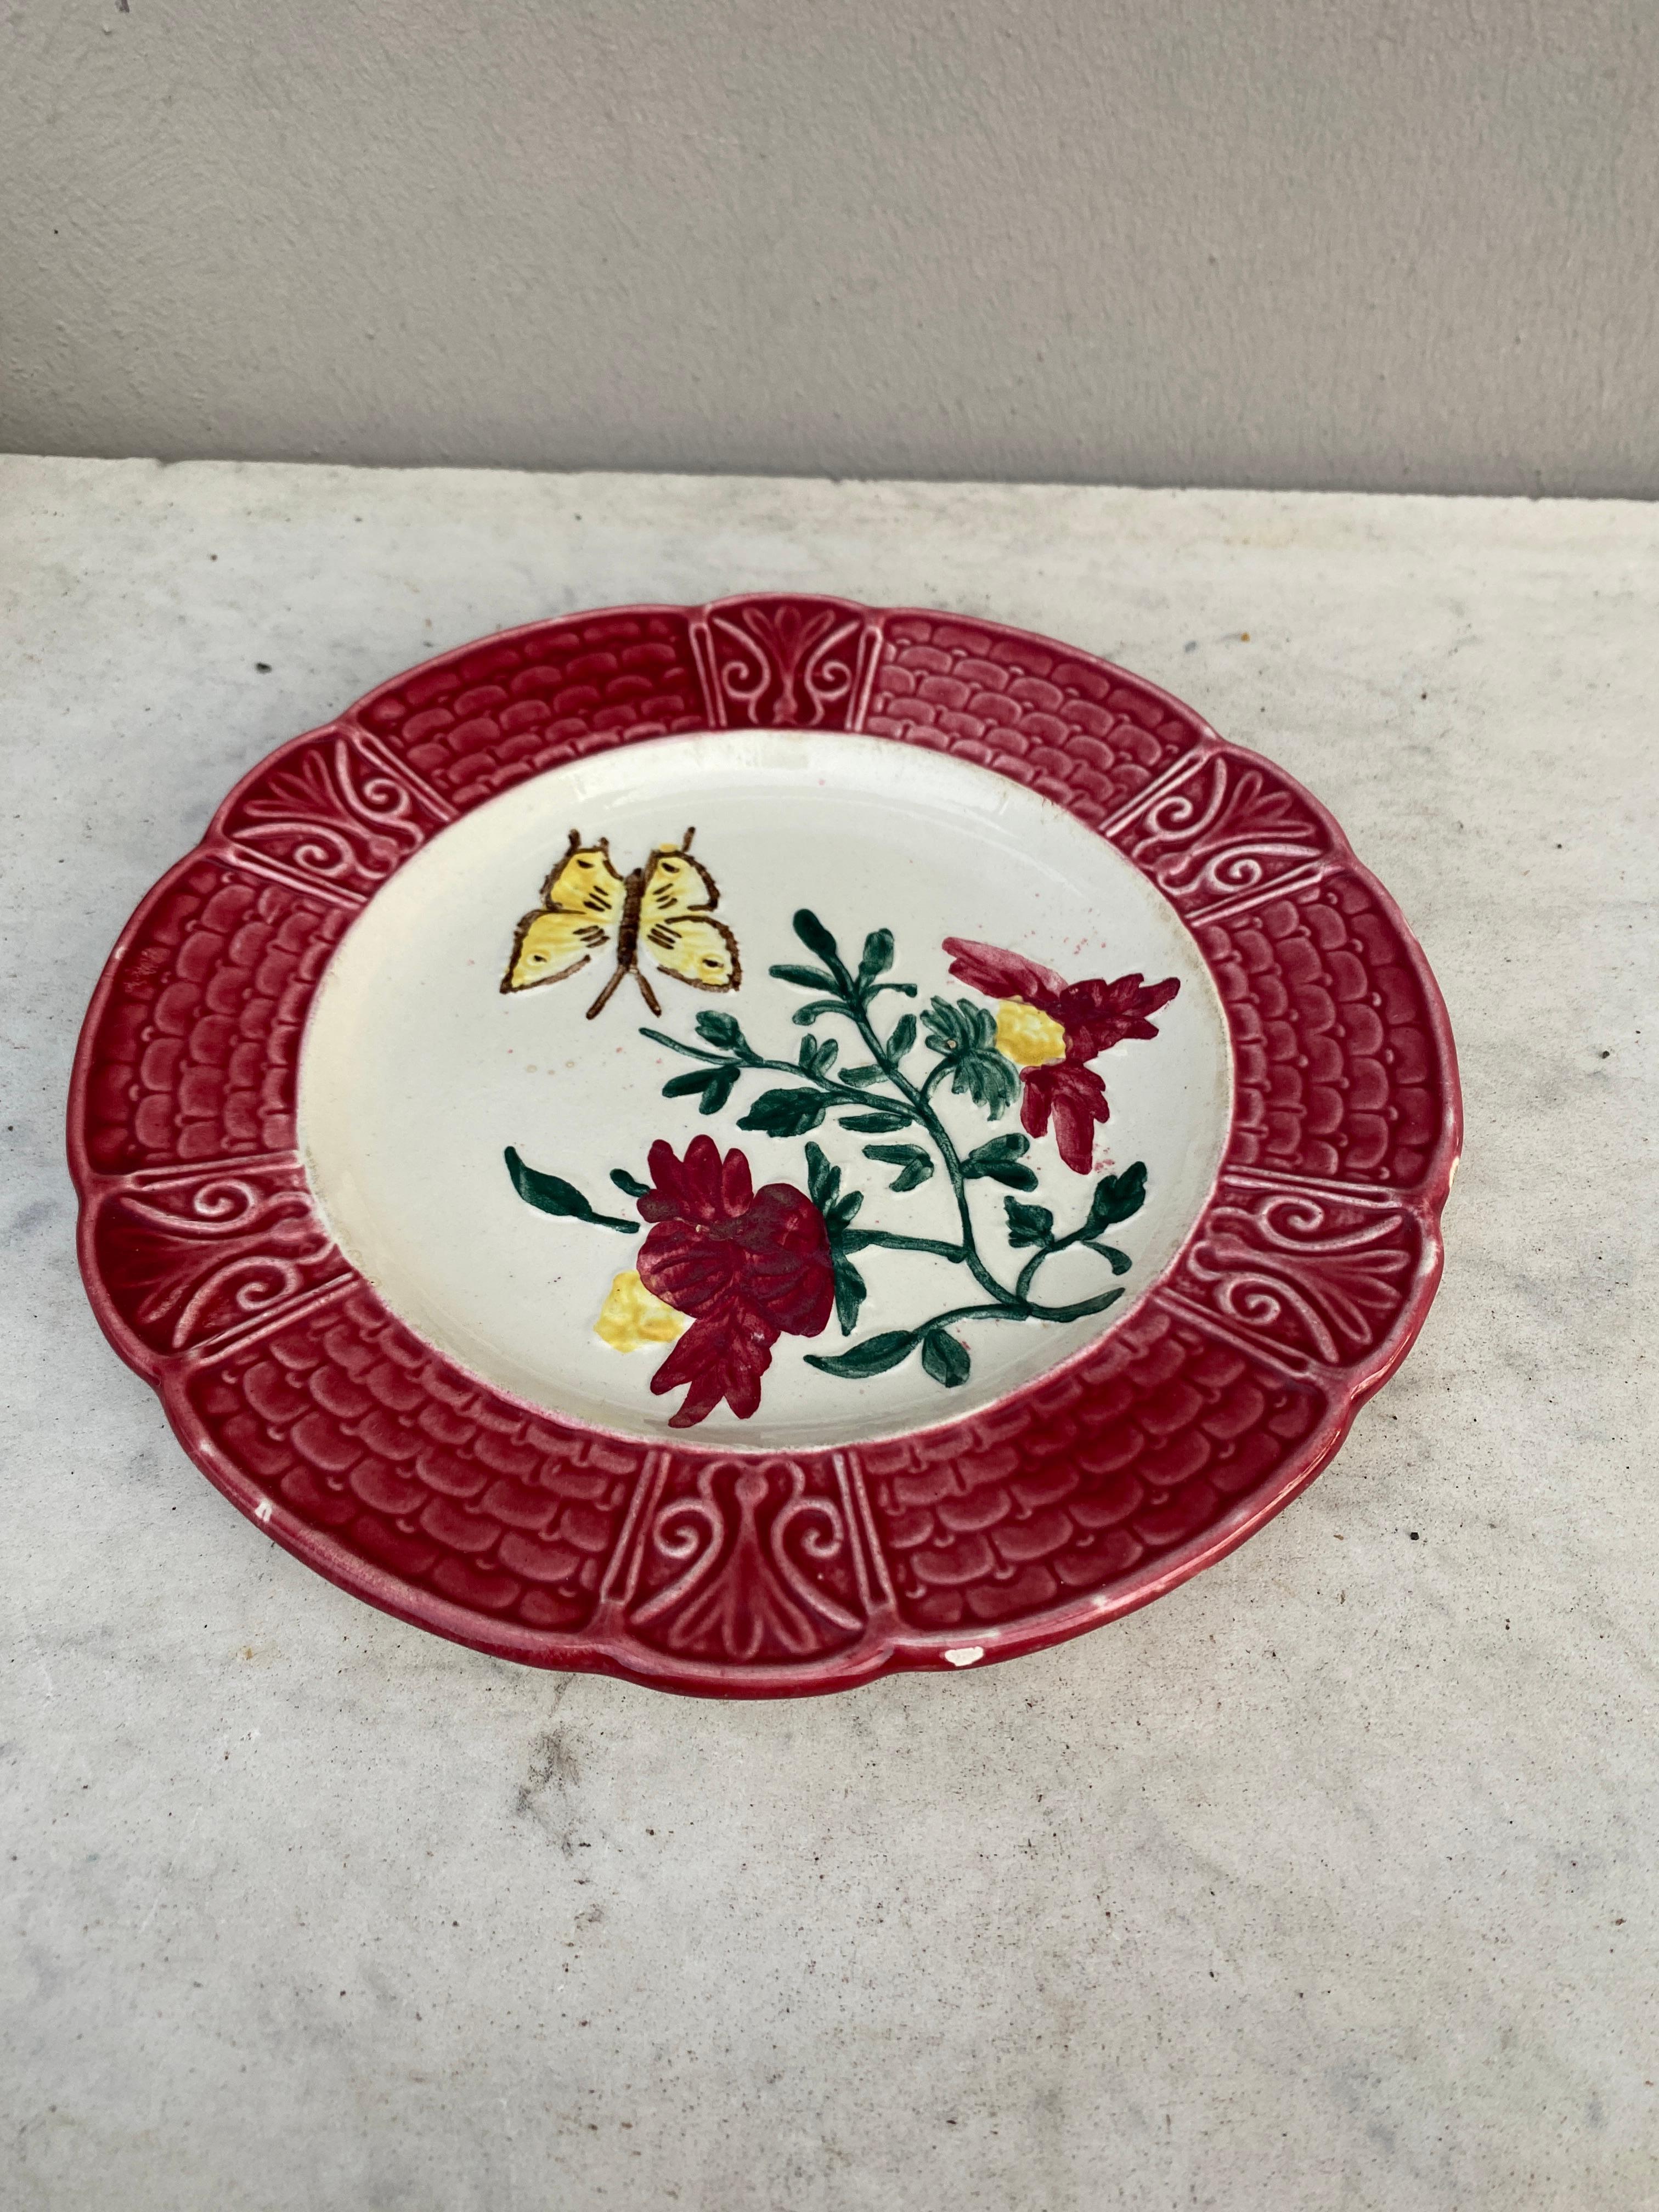 Rustic French Majolica Plate with Flowers & Butterfly, circa 1900 For Sale